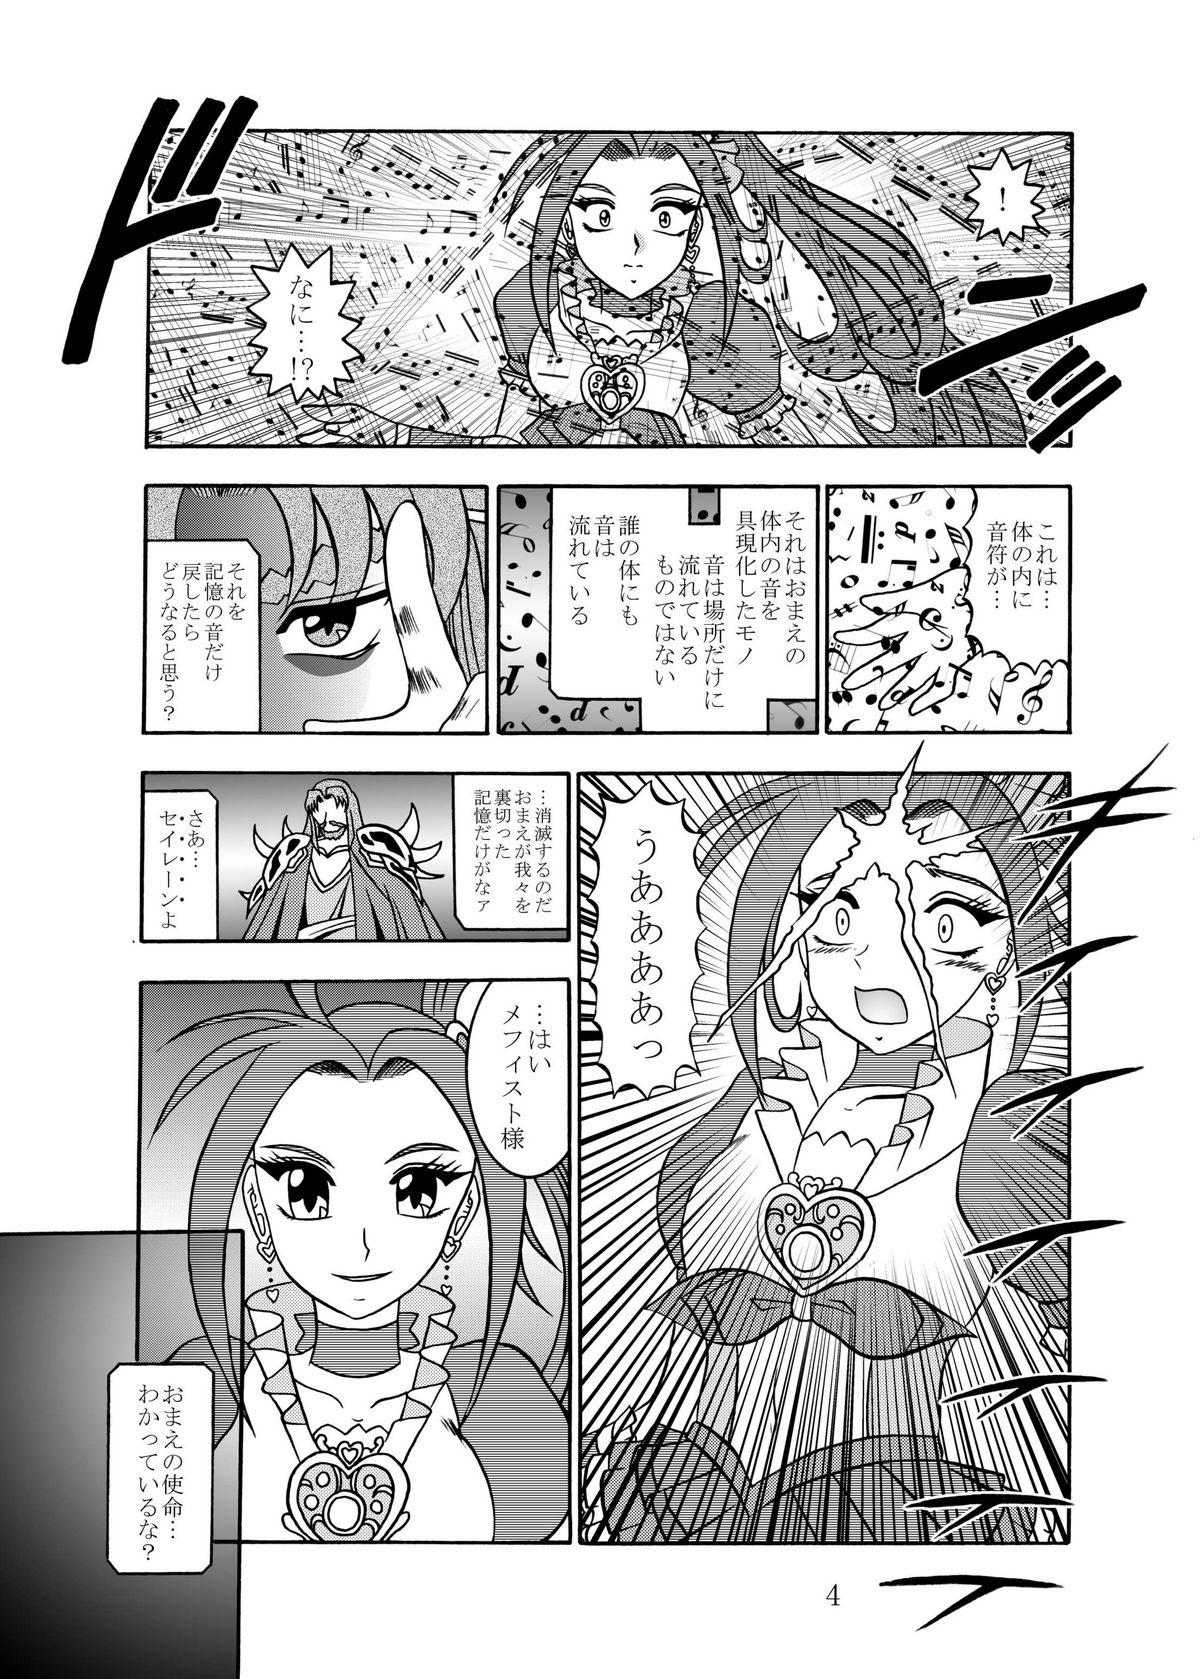 Real Sex GREATEST ECLIPSE CrazyRHYTHM - Tsuya sou - Pretty cure Suite precure Sologirl - Page 3